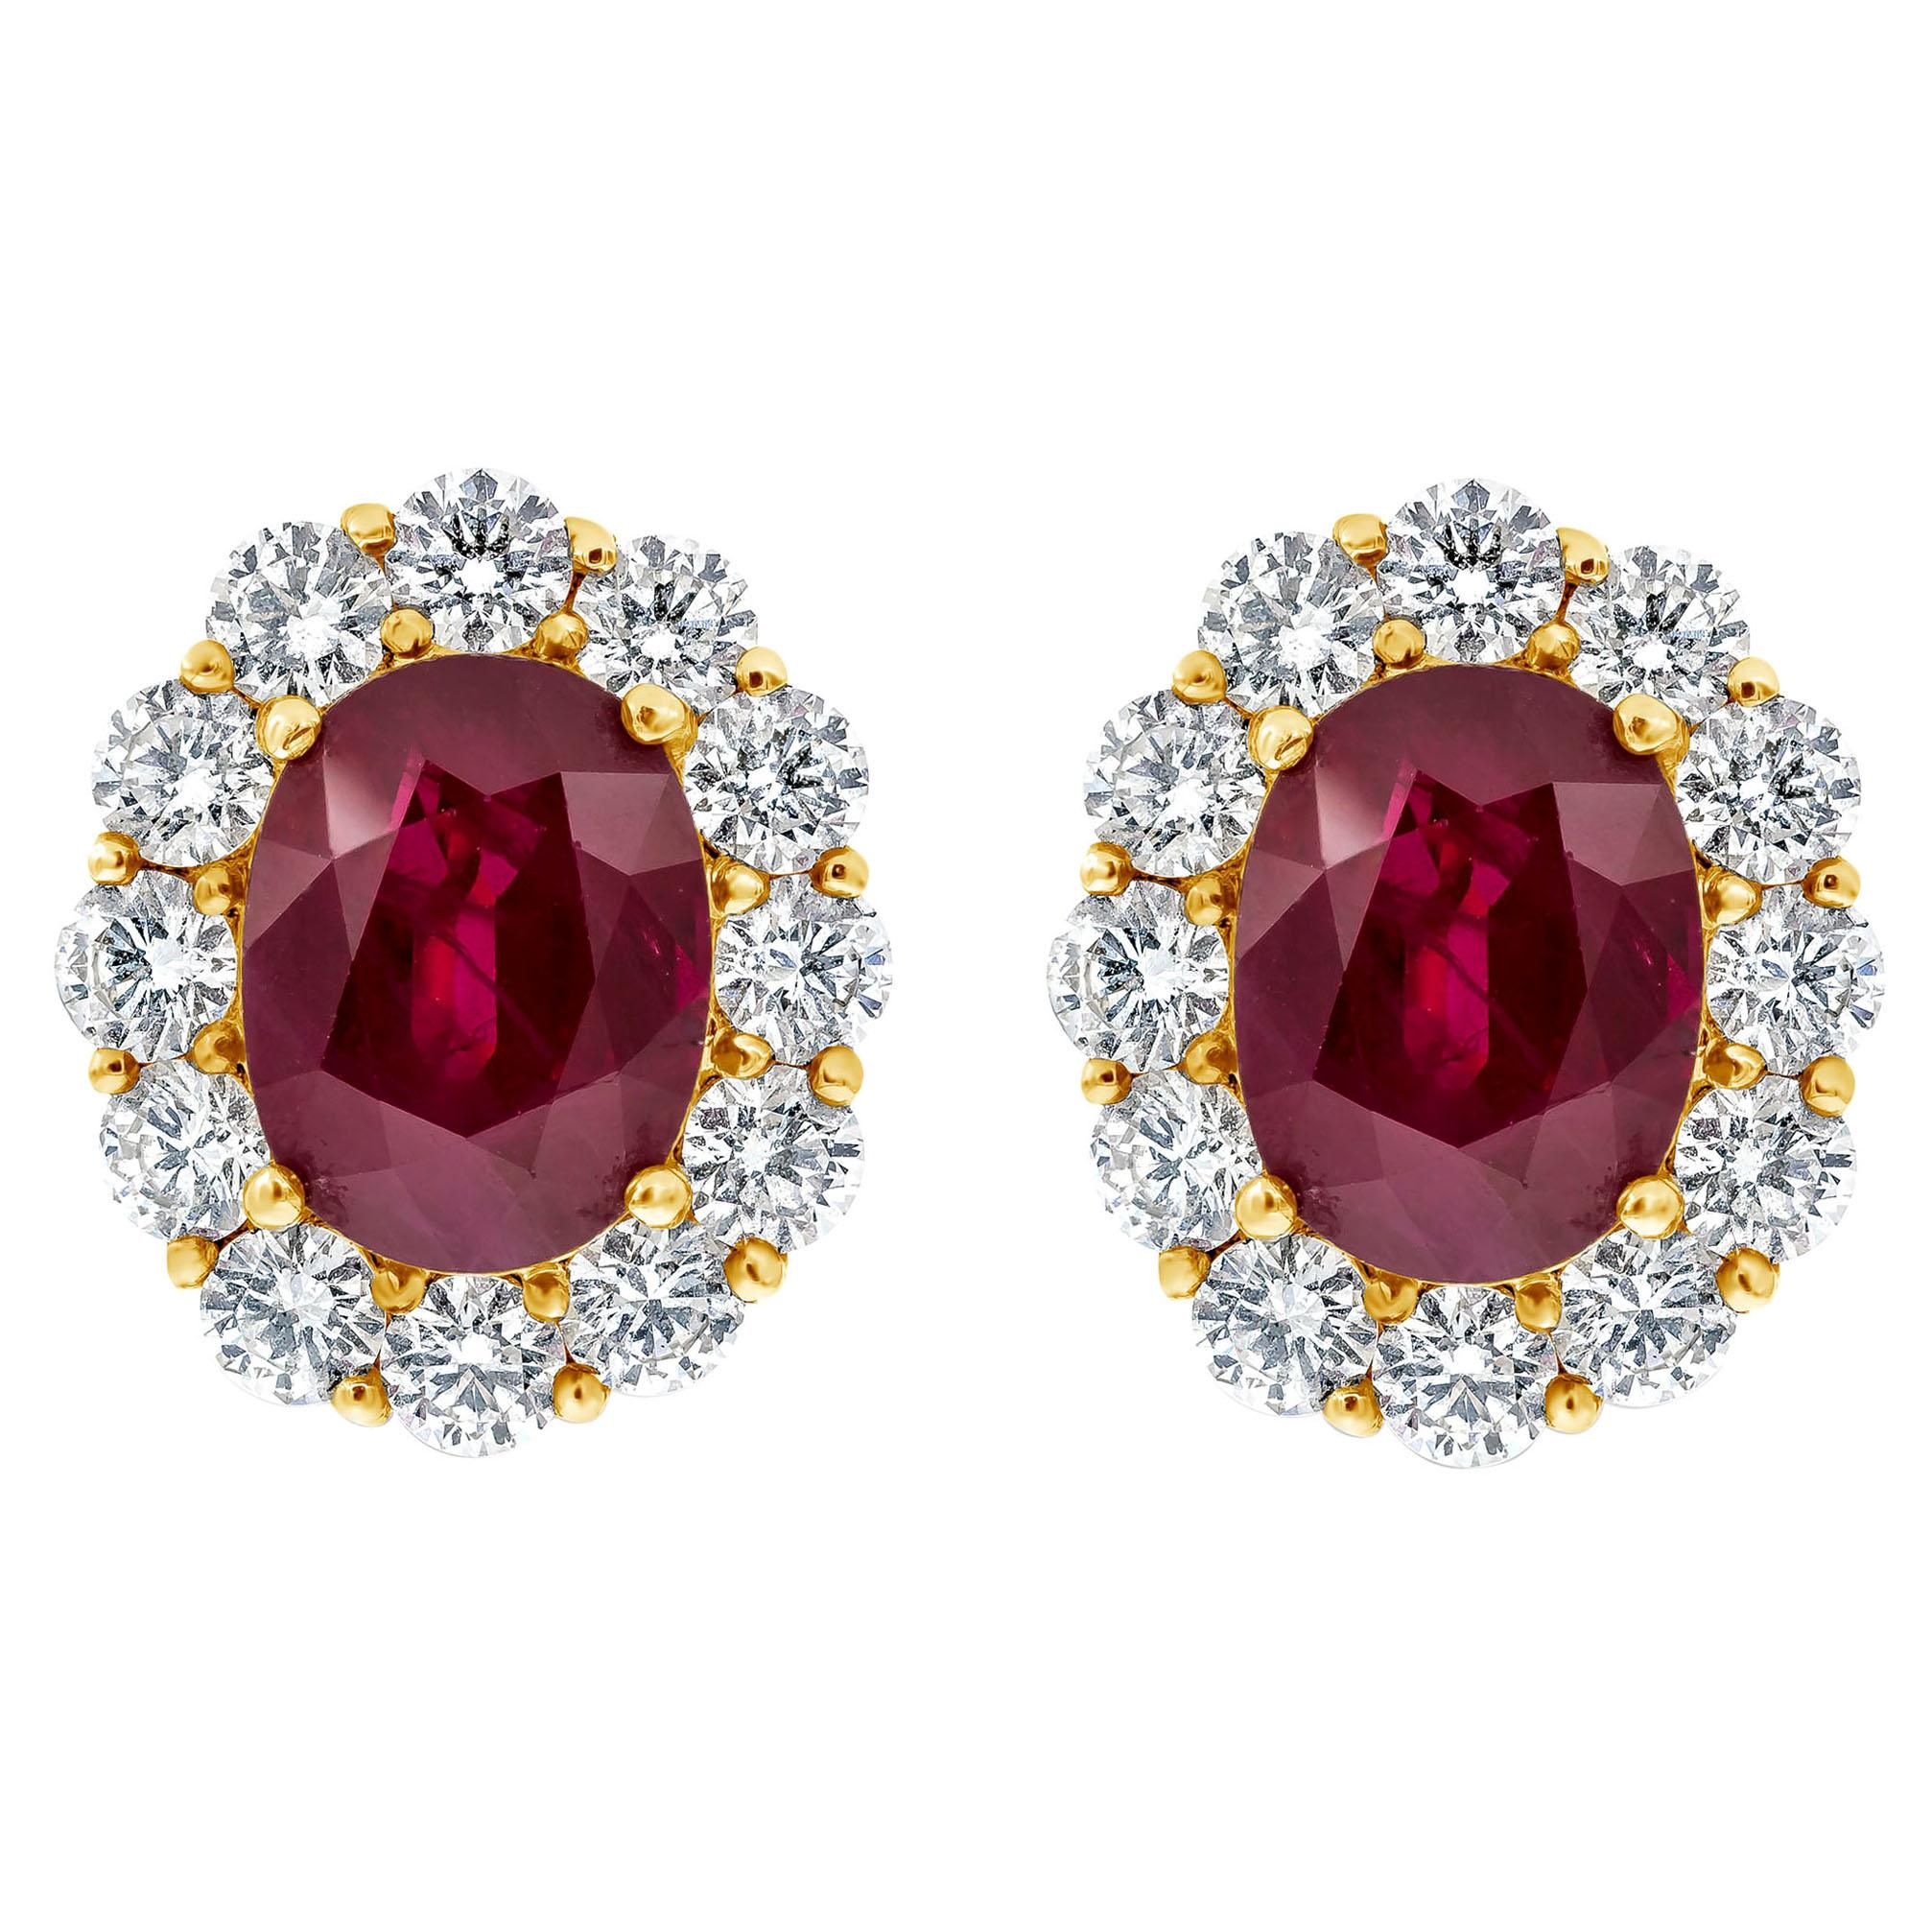 Roman Malakov 5.69 Carats Total Oval Cut Ruby and Diamond Halo Clip-On Earrings For Sale